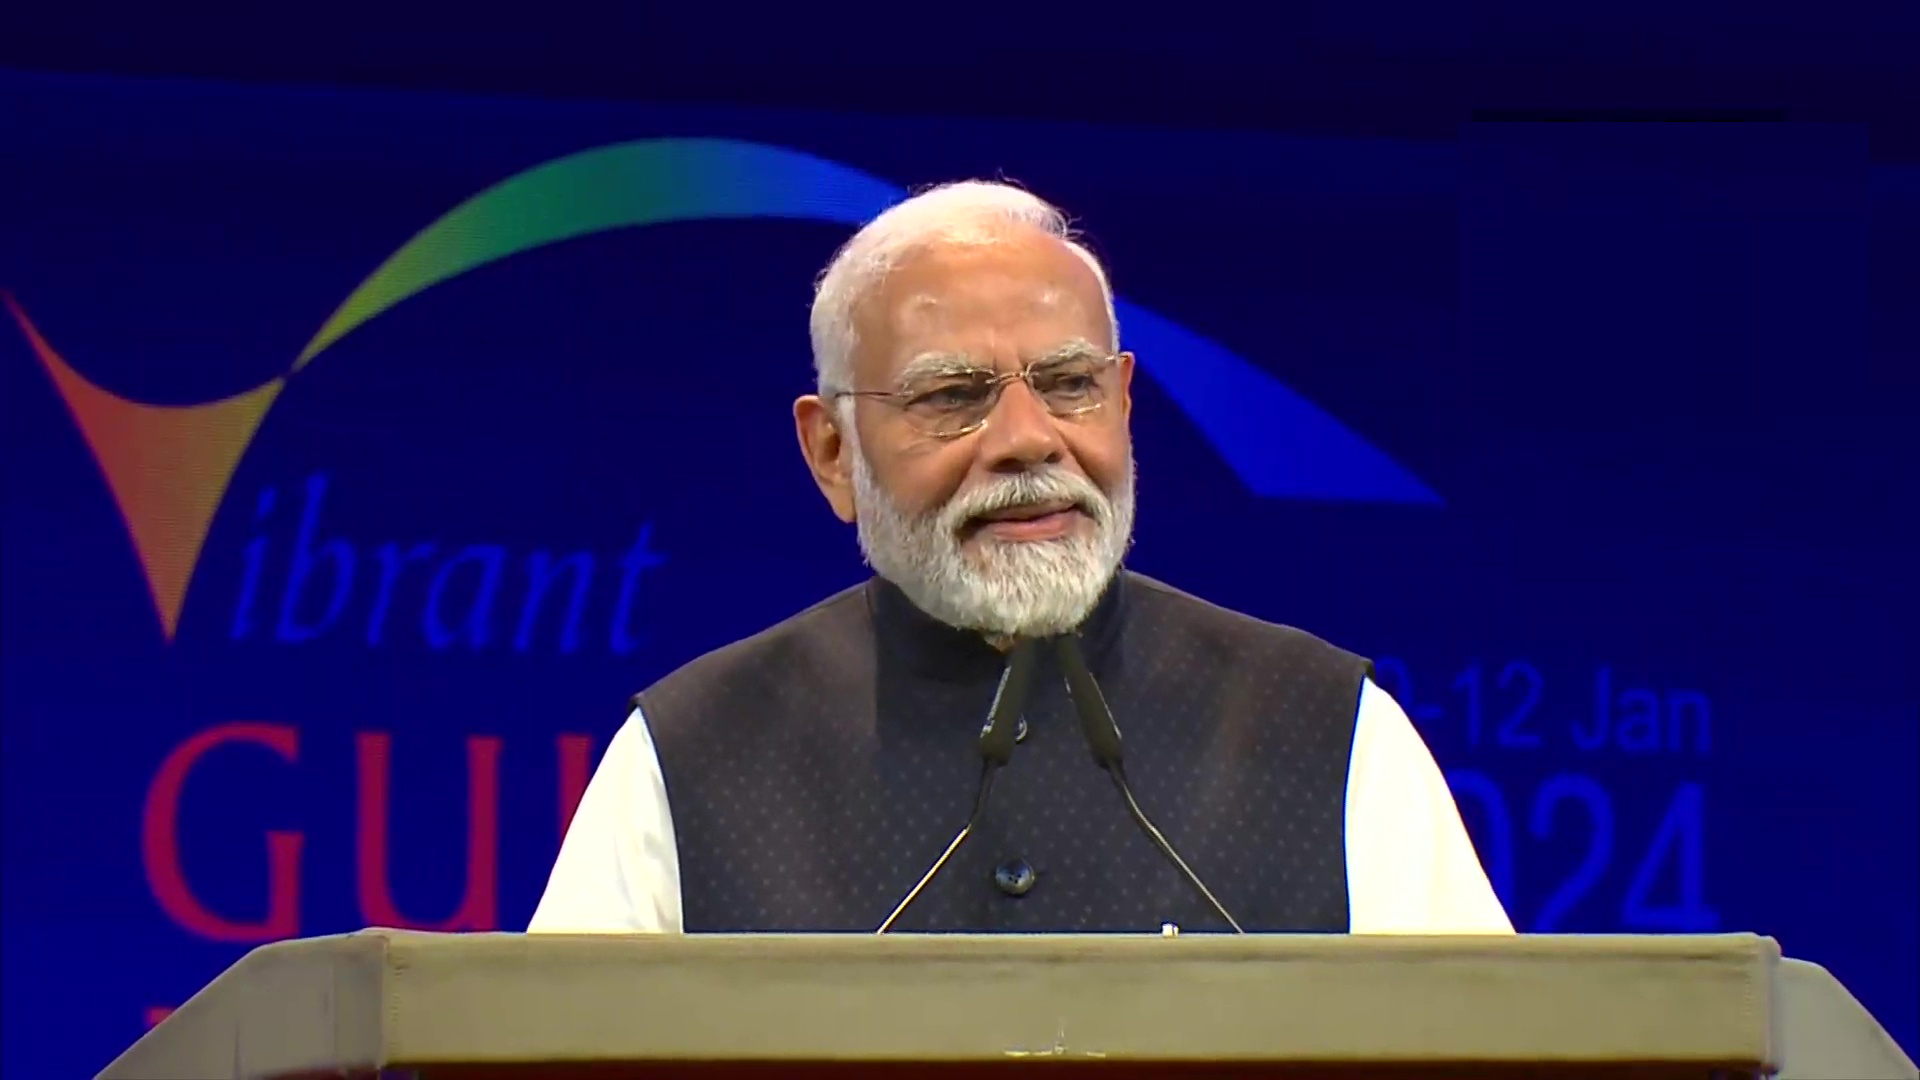 World Looks At India As Global Growth Engine, Trusted Friend And Pillar Of Stability: PM Modi